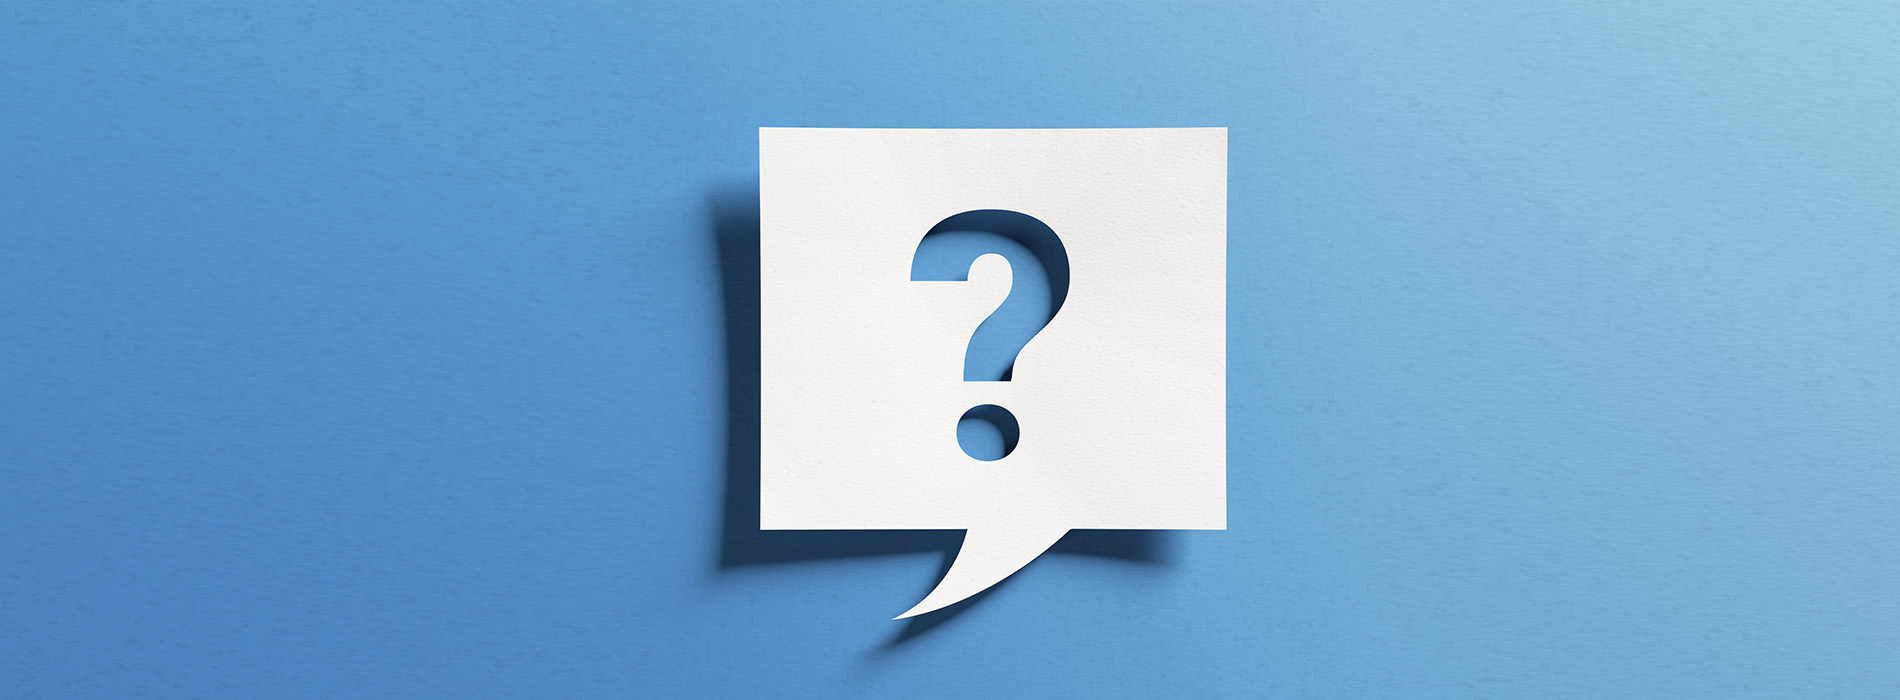 The image features a question mark graphic with an envelope icon next to it, set against a light blue background.